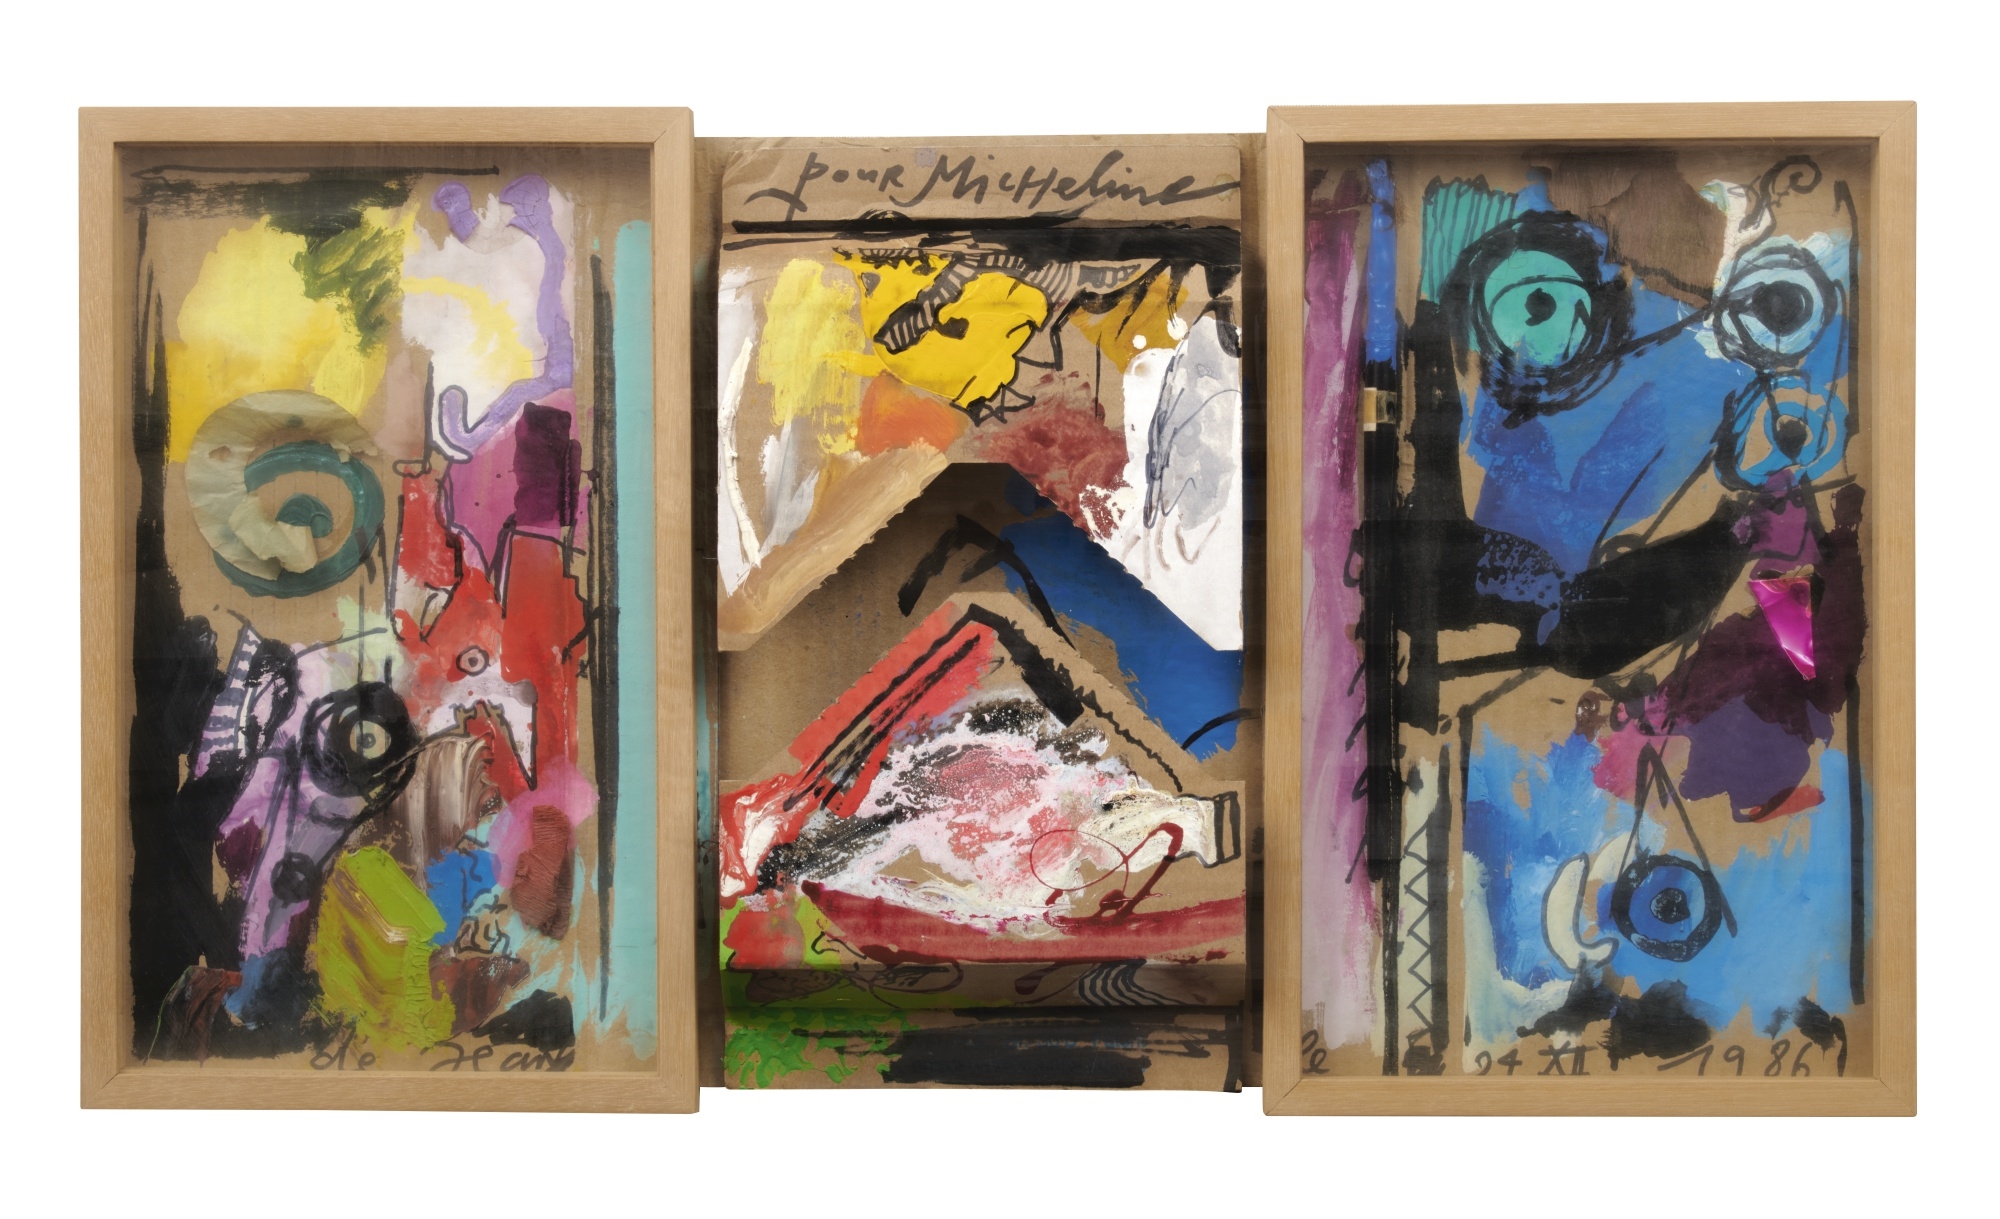 POUR MICHELINE (TRIPTYCH) by Jean Tinguely, 1986